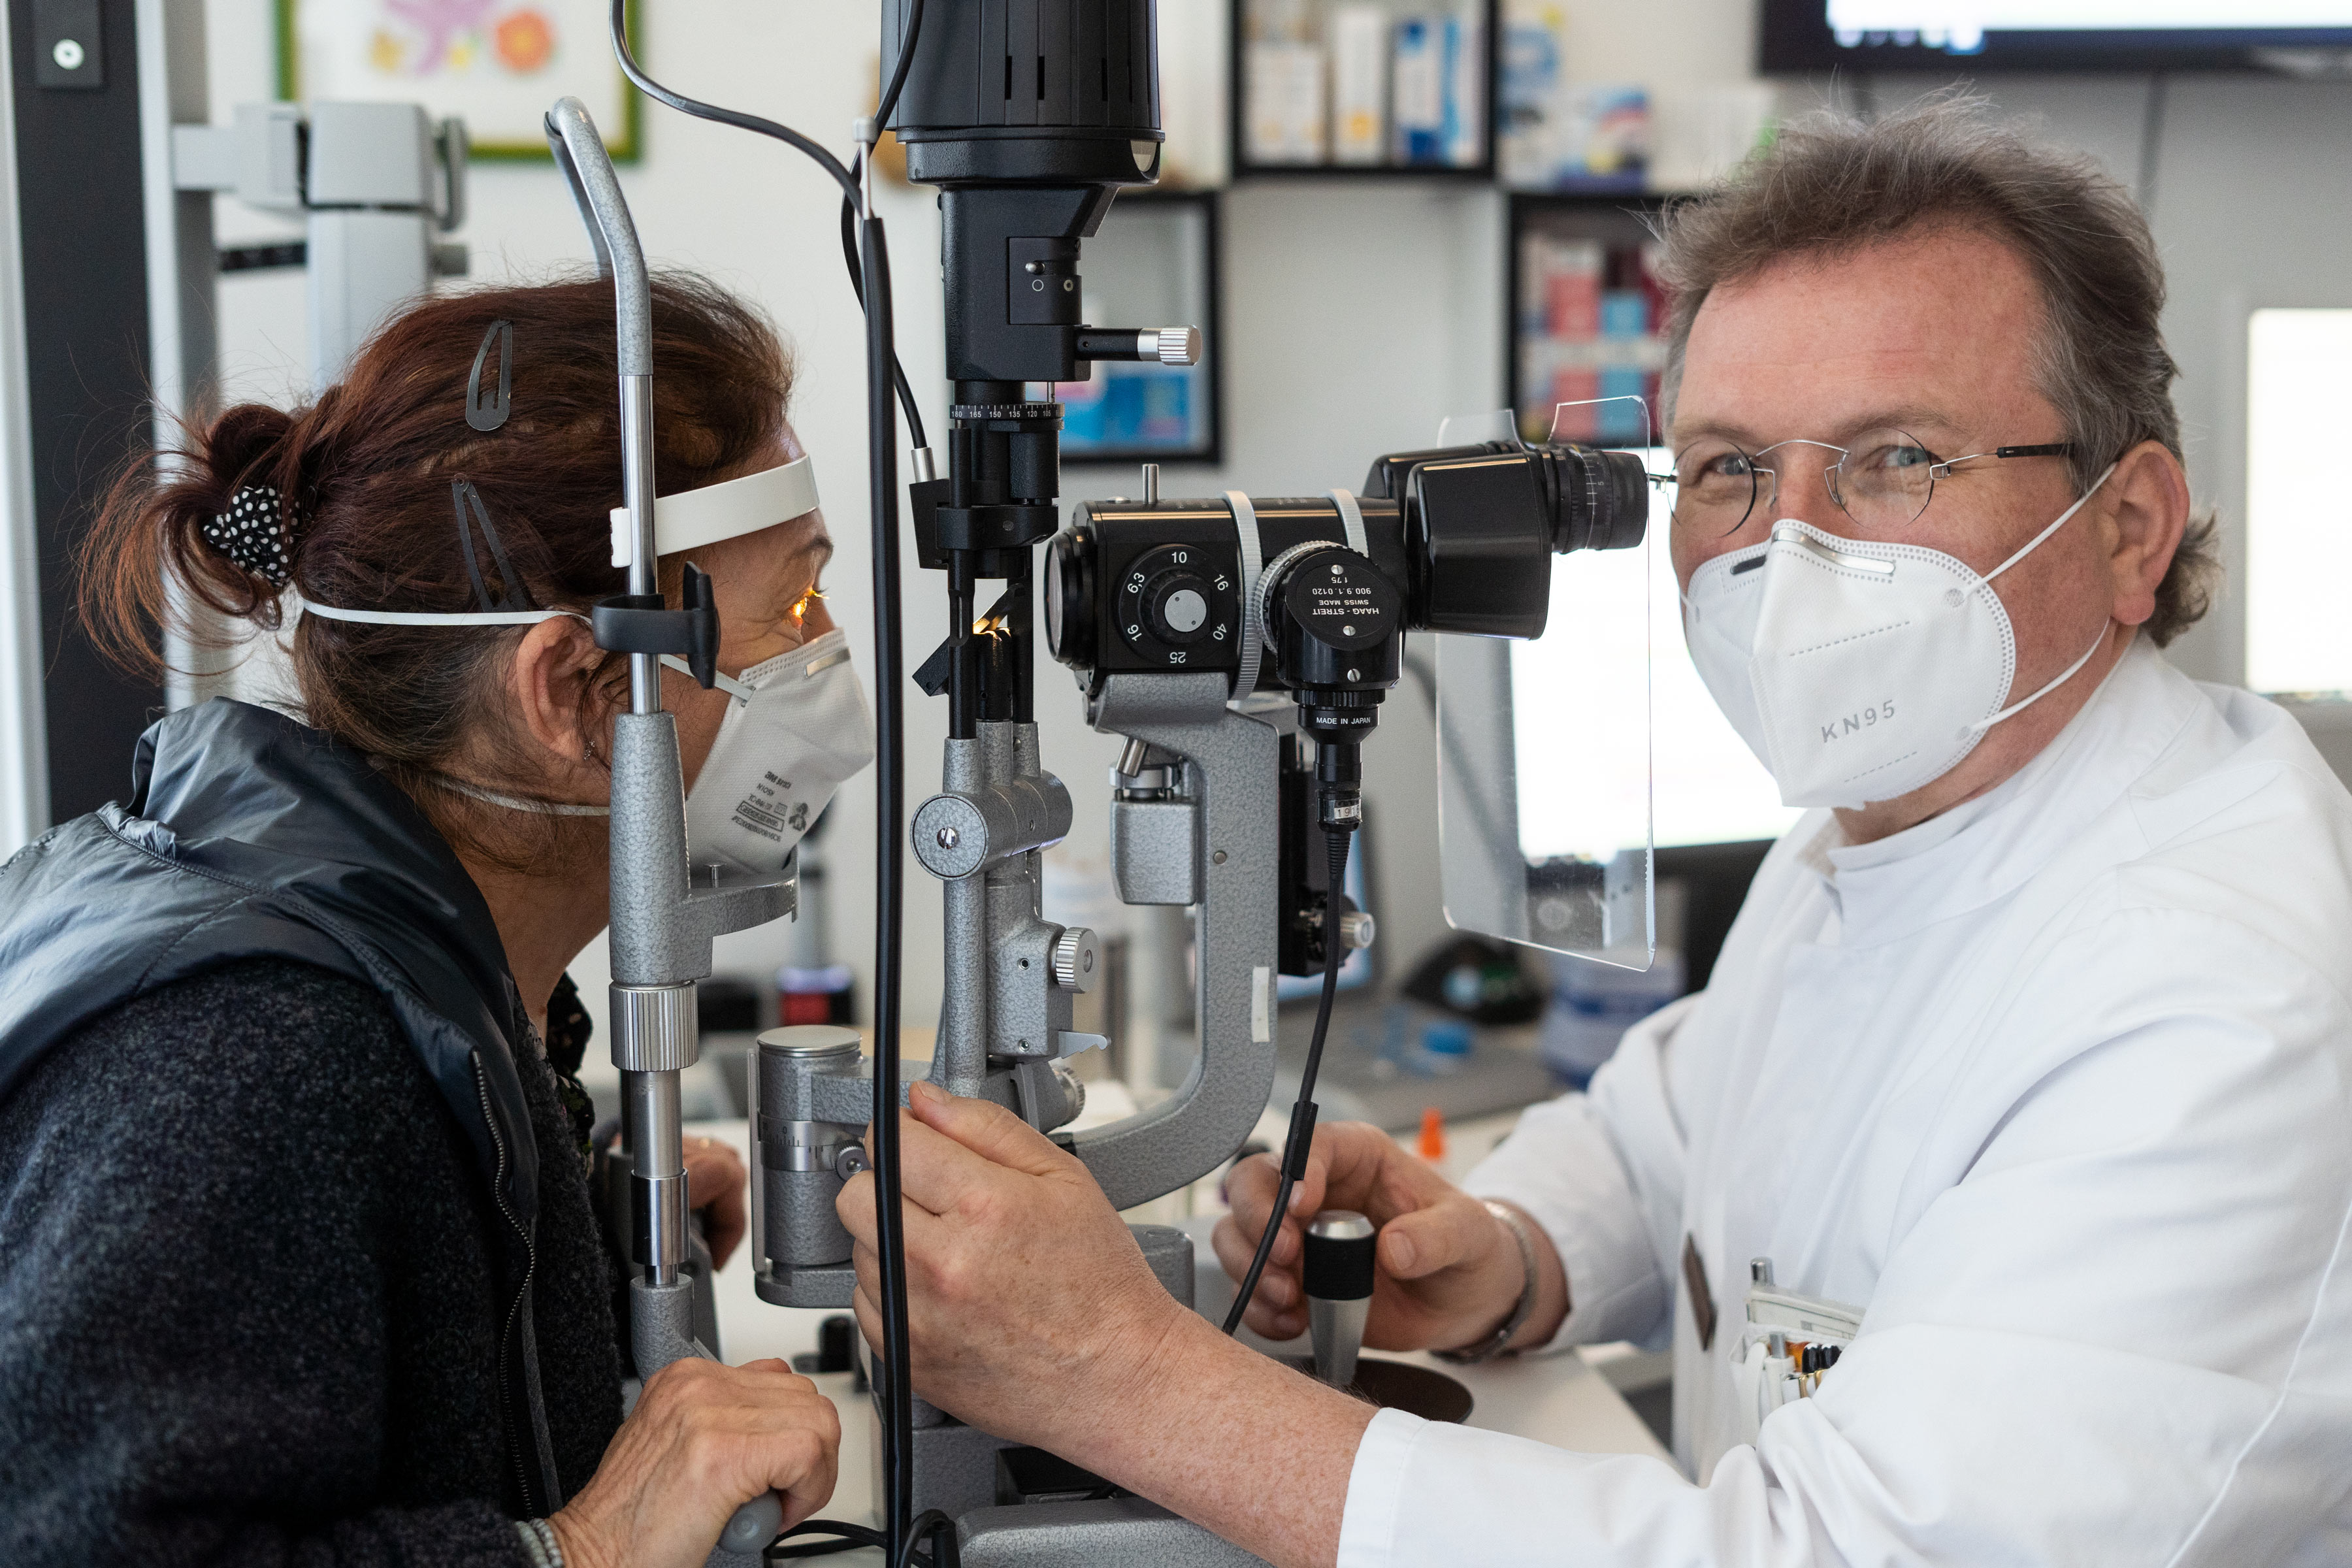 Prof. Seitz during the examination at the slit lamp